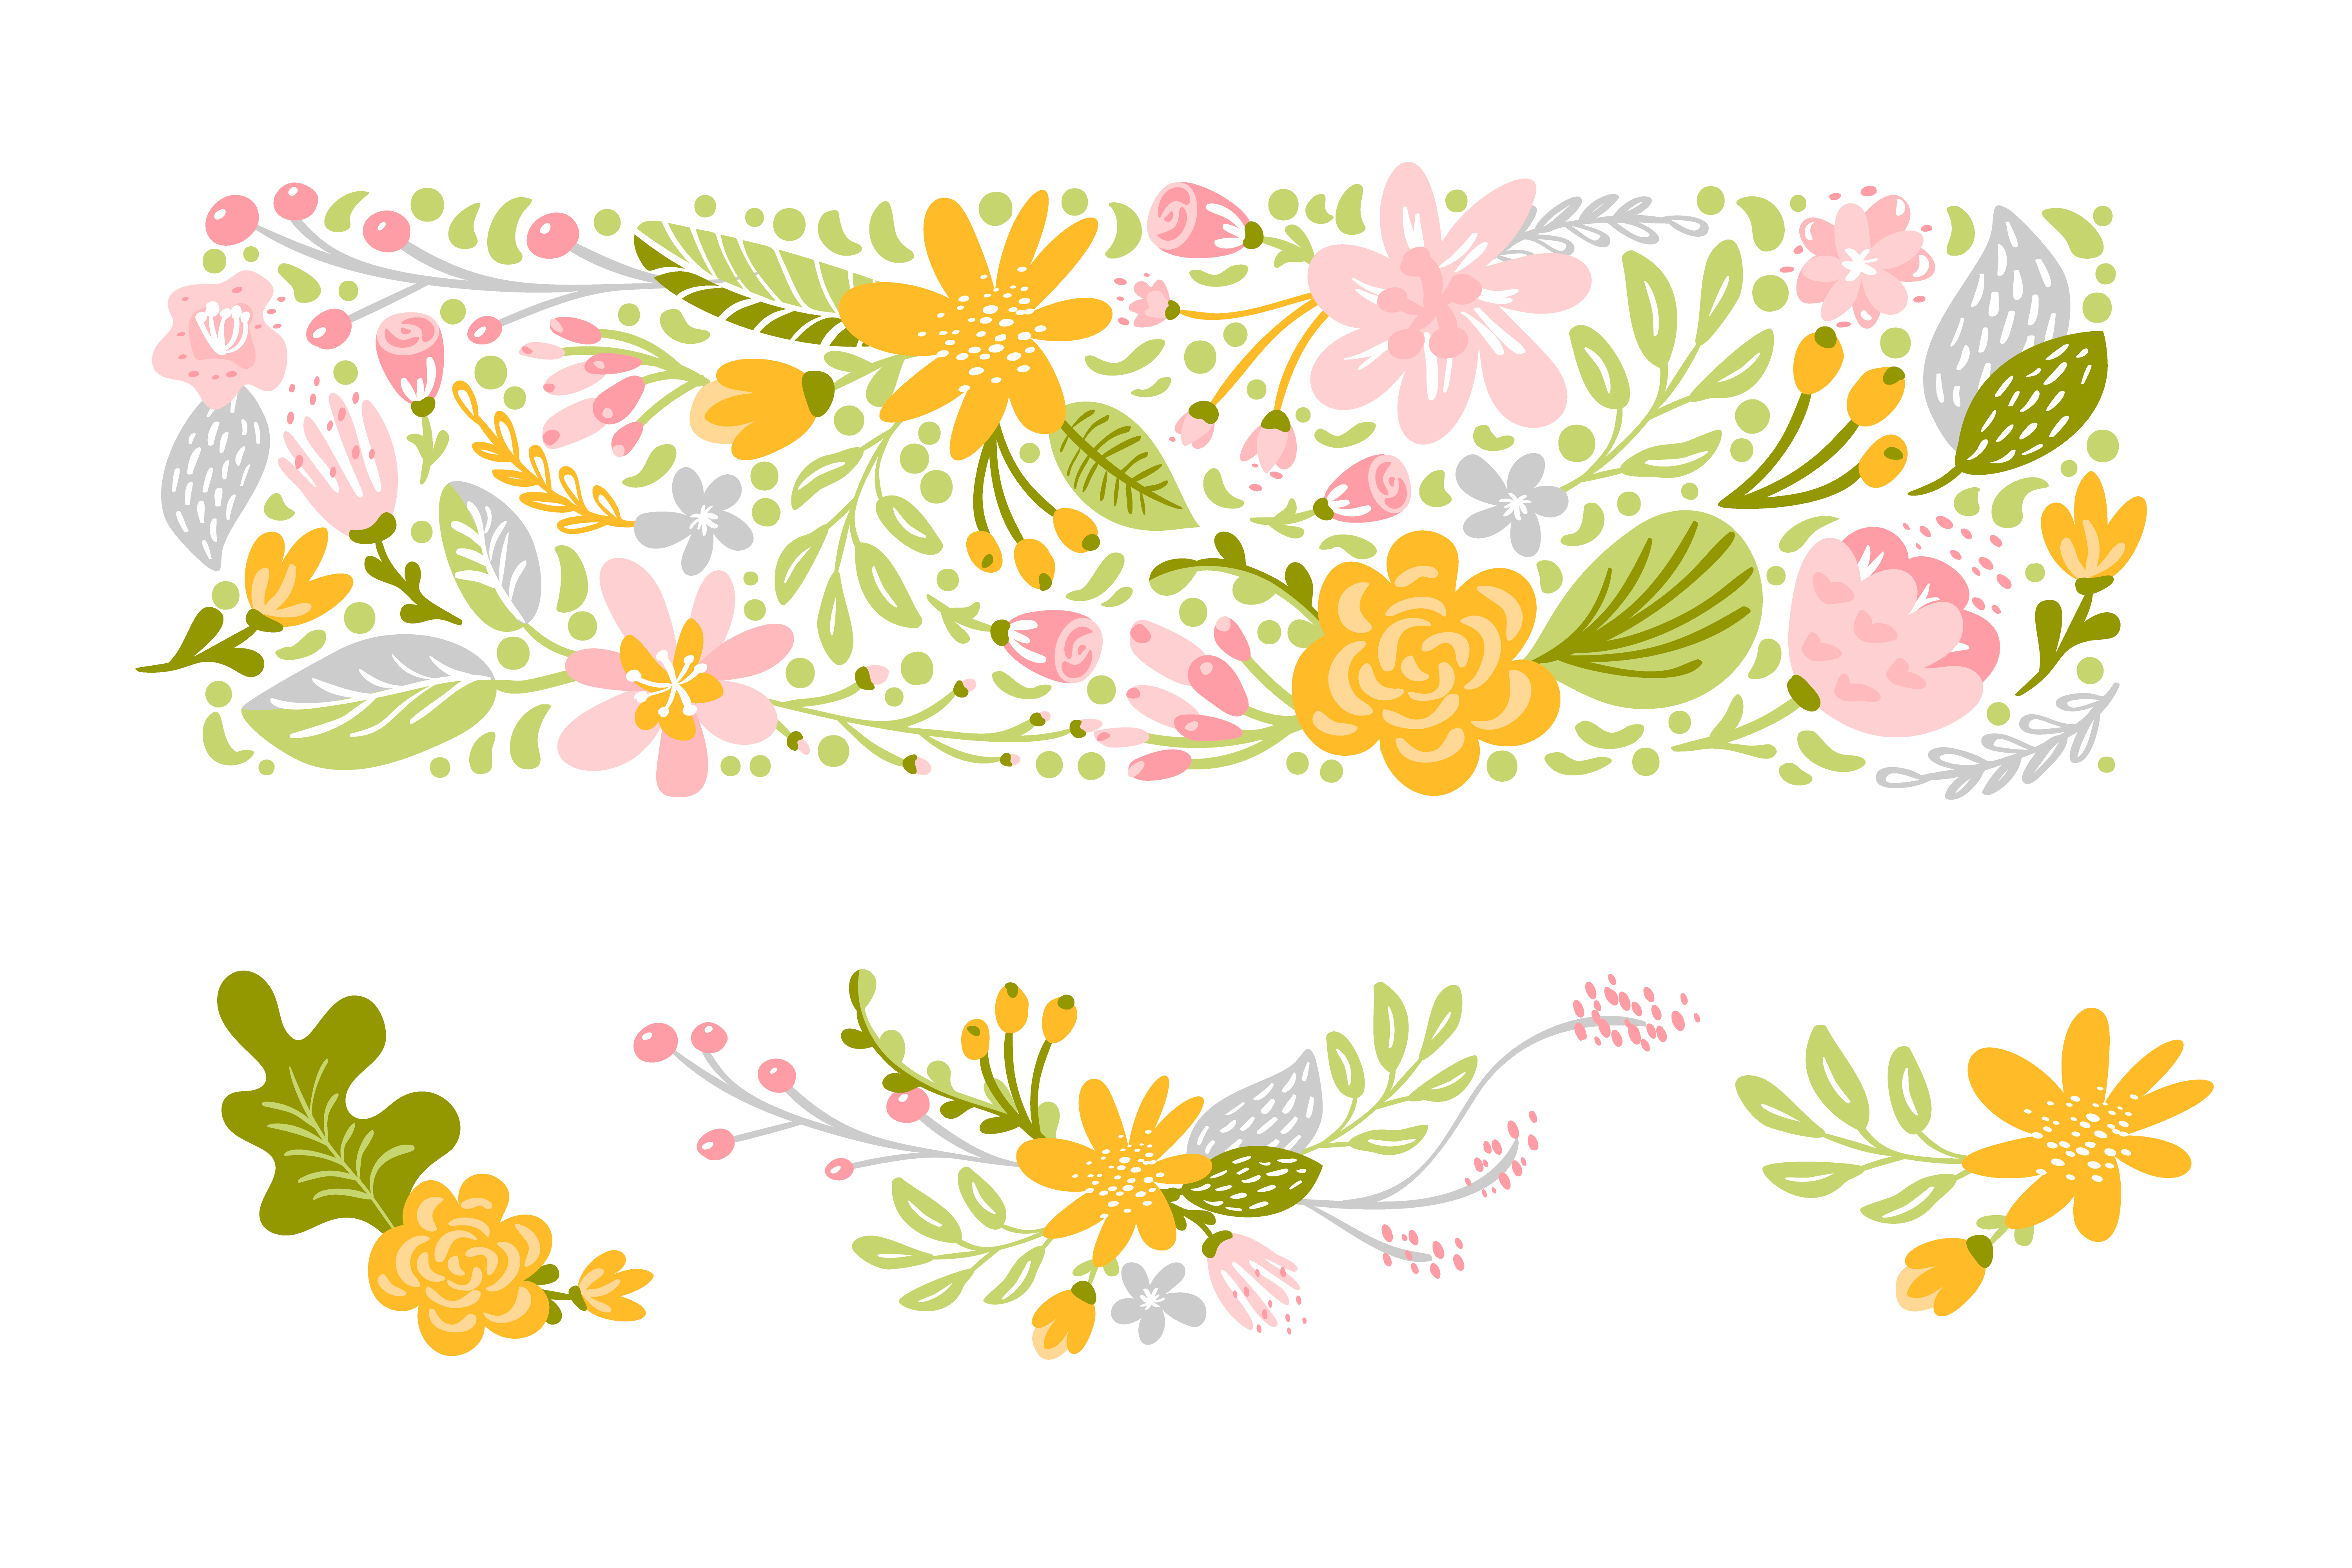 Flower Vector set in pastel colors. Isolated floral flat